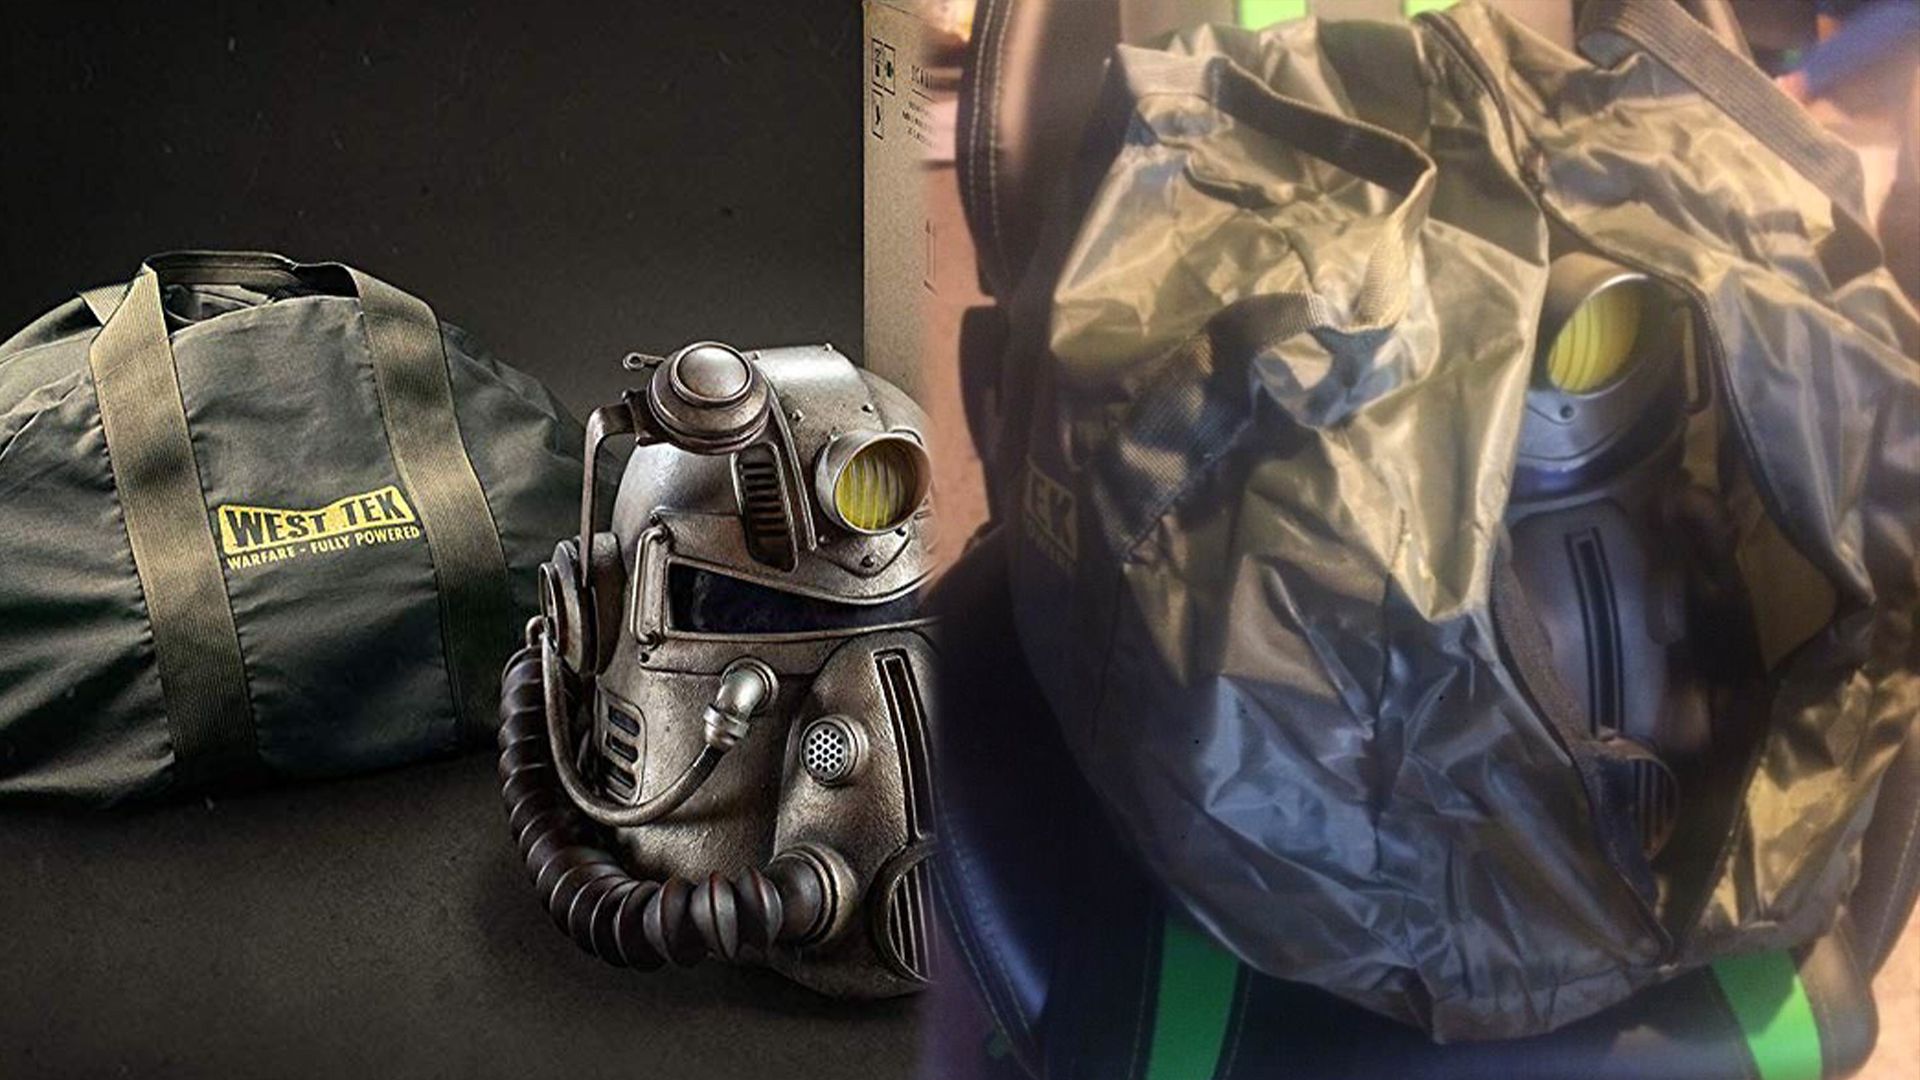 Bethesda Gives Legit Fallout 76 Bag to Influencers Rips Off Paying Customers